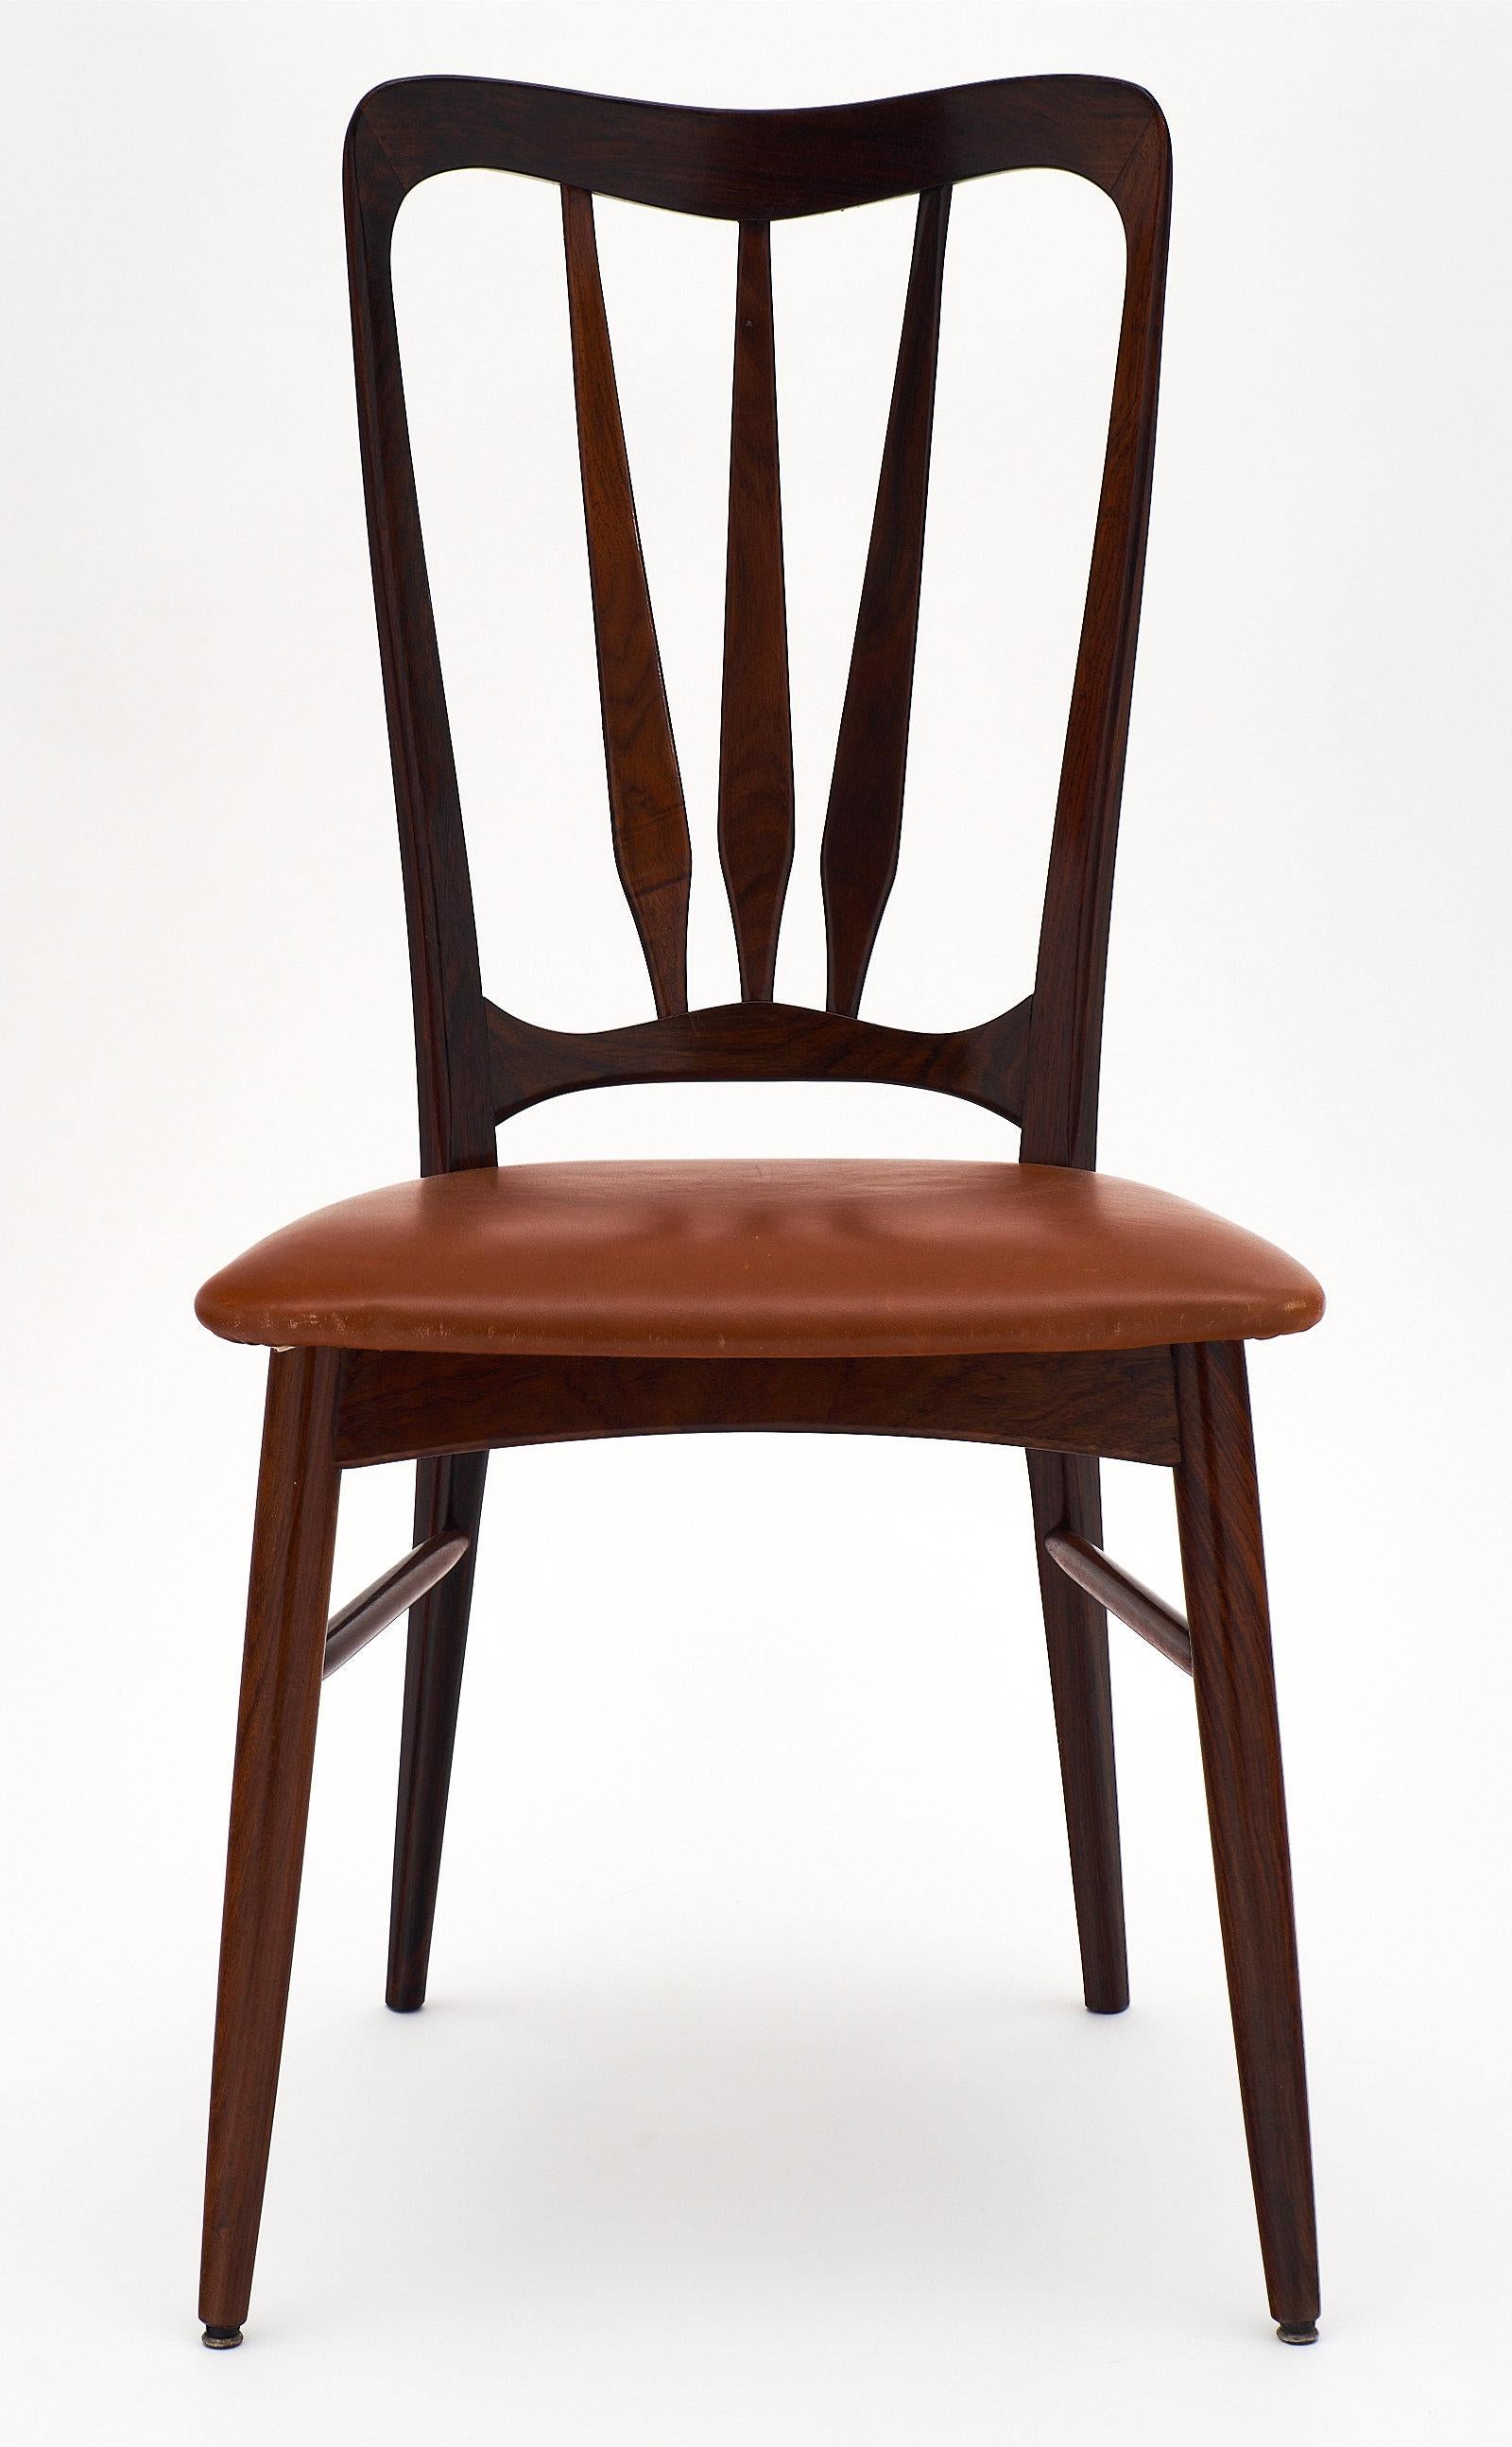 Set of six Danish “Ingrid” dining chairs designed by Niels Koefoed for Koefoed Hornslet. They have Danish control stamps and Koefoed stamps. We love the curved design and tall backs.